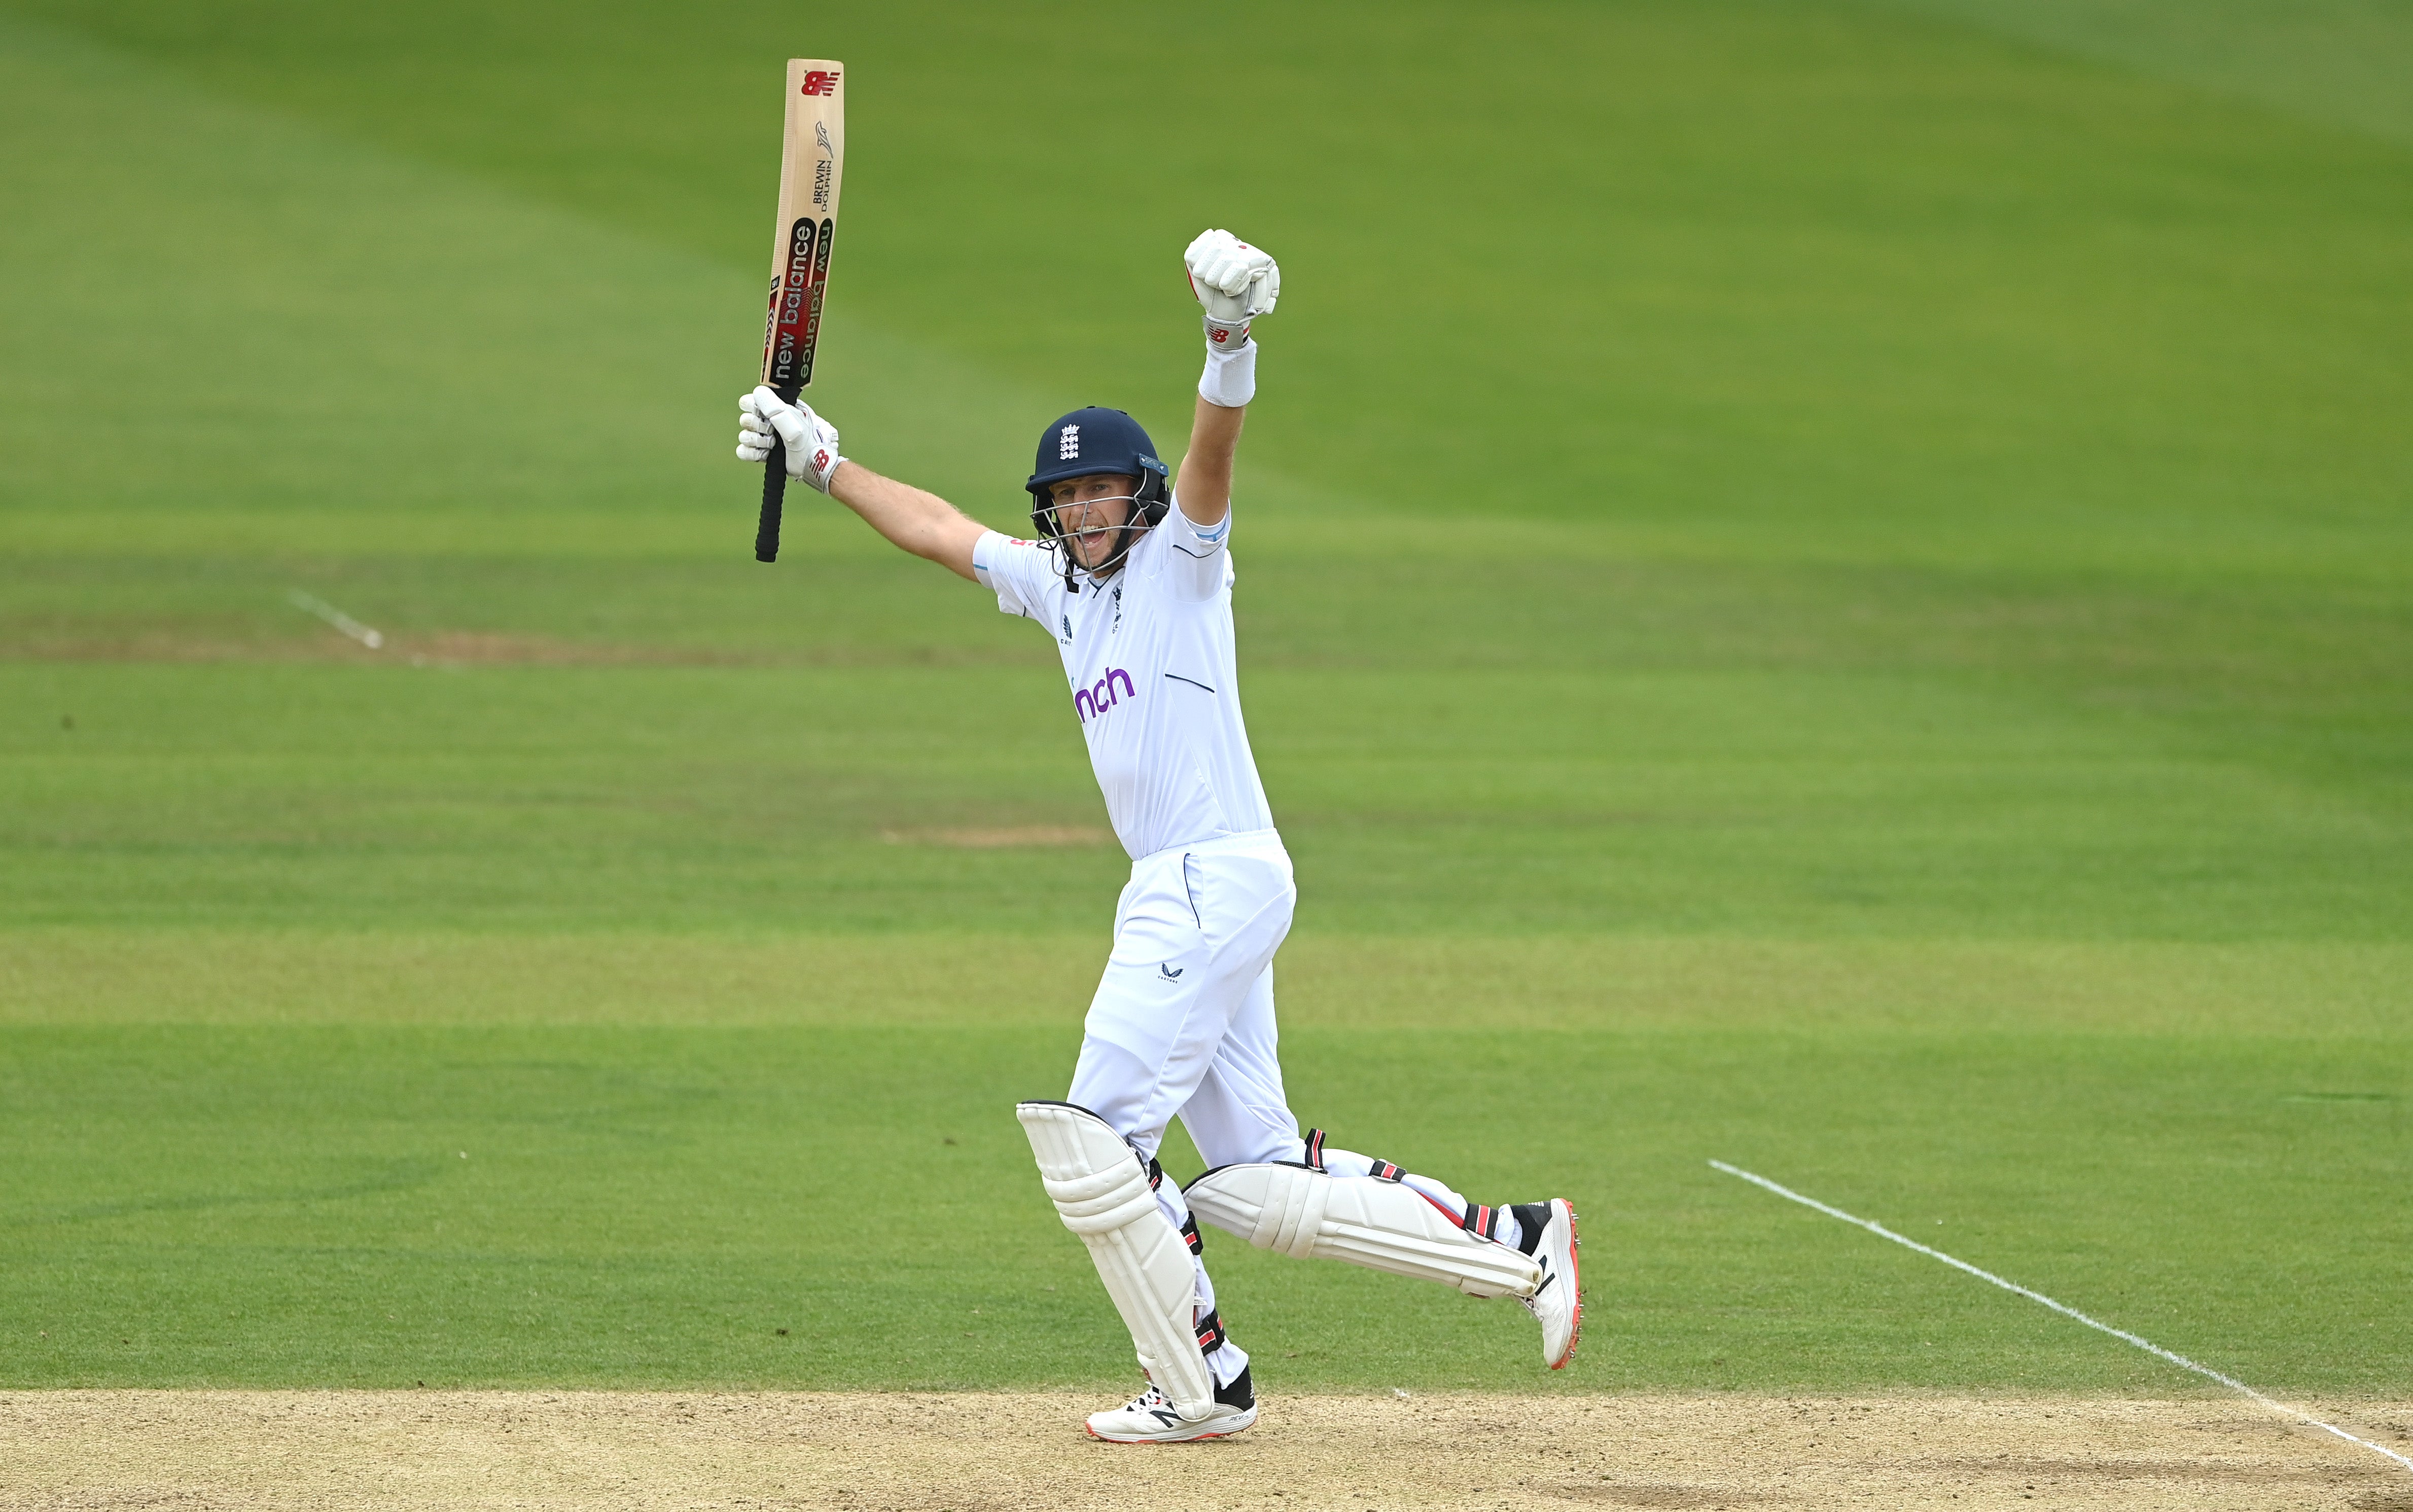 Mighty win: Joe Root celebrates England’s Test victory over New Zealand